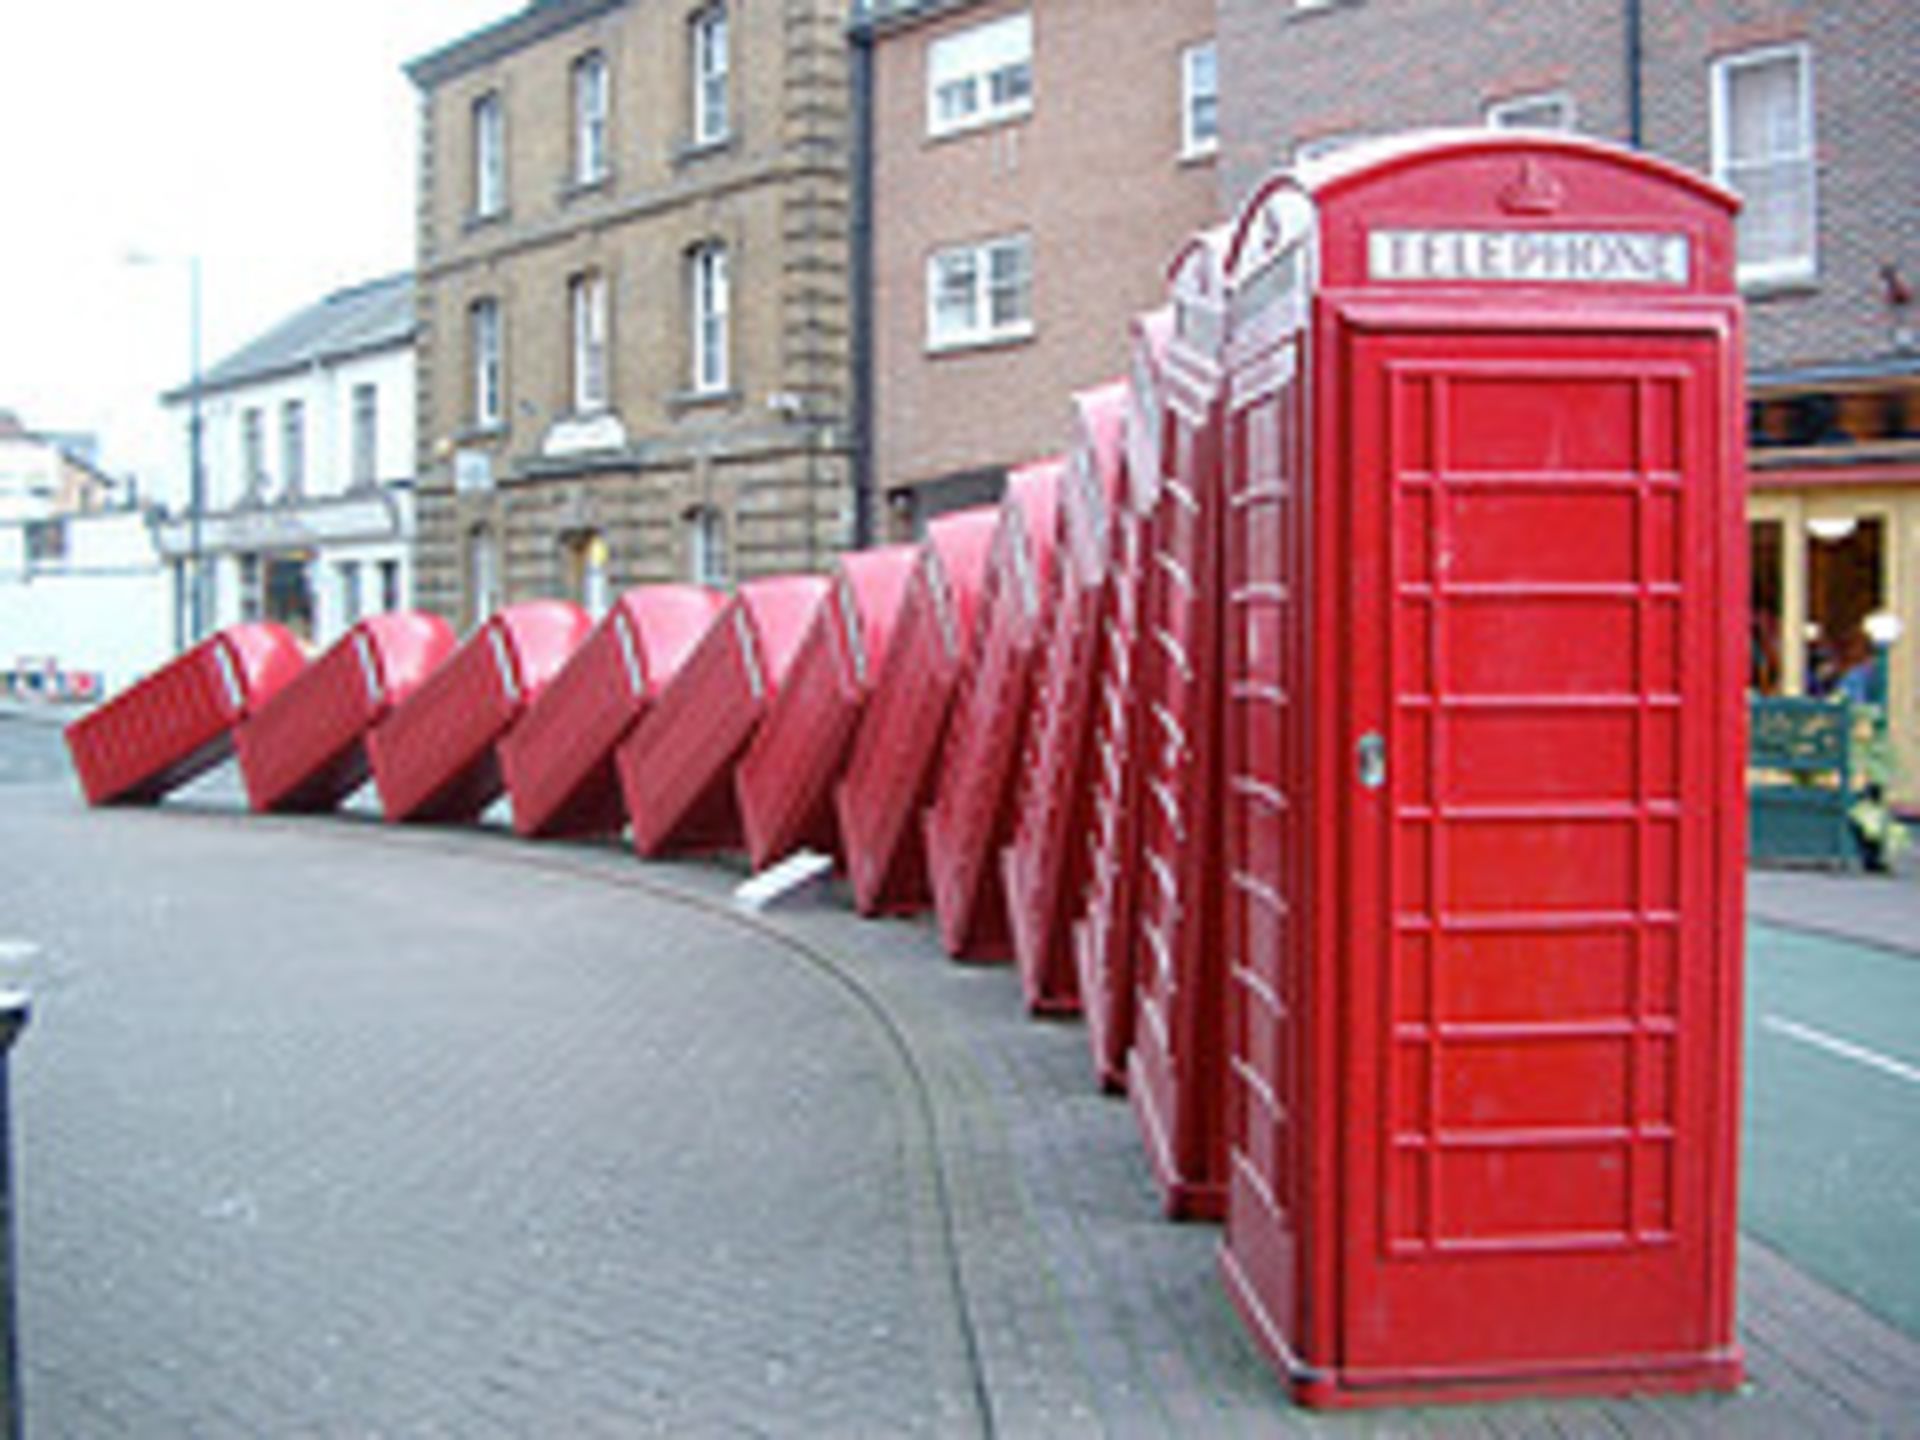 V Brand New Canvas Print Of Kingston Phone Box 60 x 40 cms X 2 YOUR BID PRICE TO BE MULTIPLIED BY